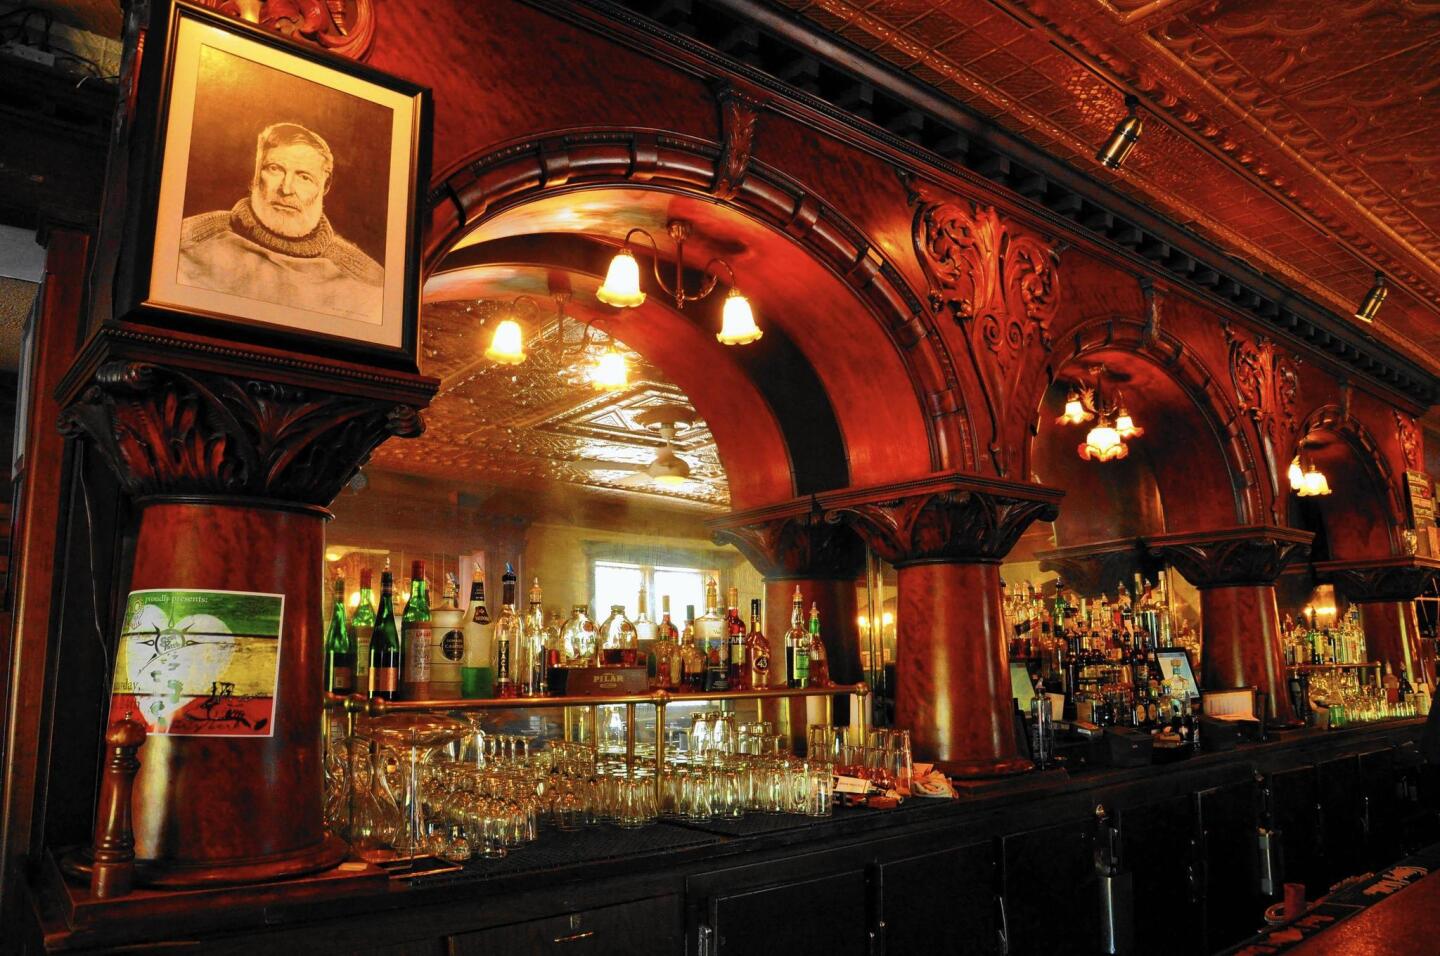 A portrait of Ernest Hemingway looks down from the mahogany bar at City Park Grill in Petoskey, Mich.